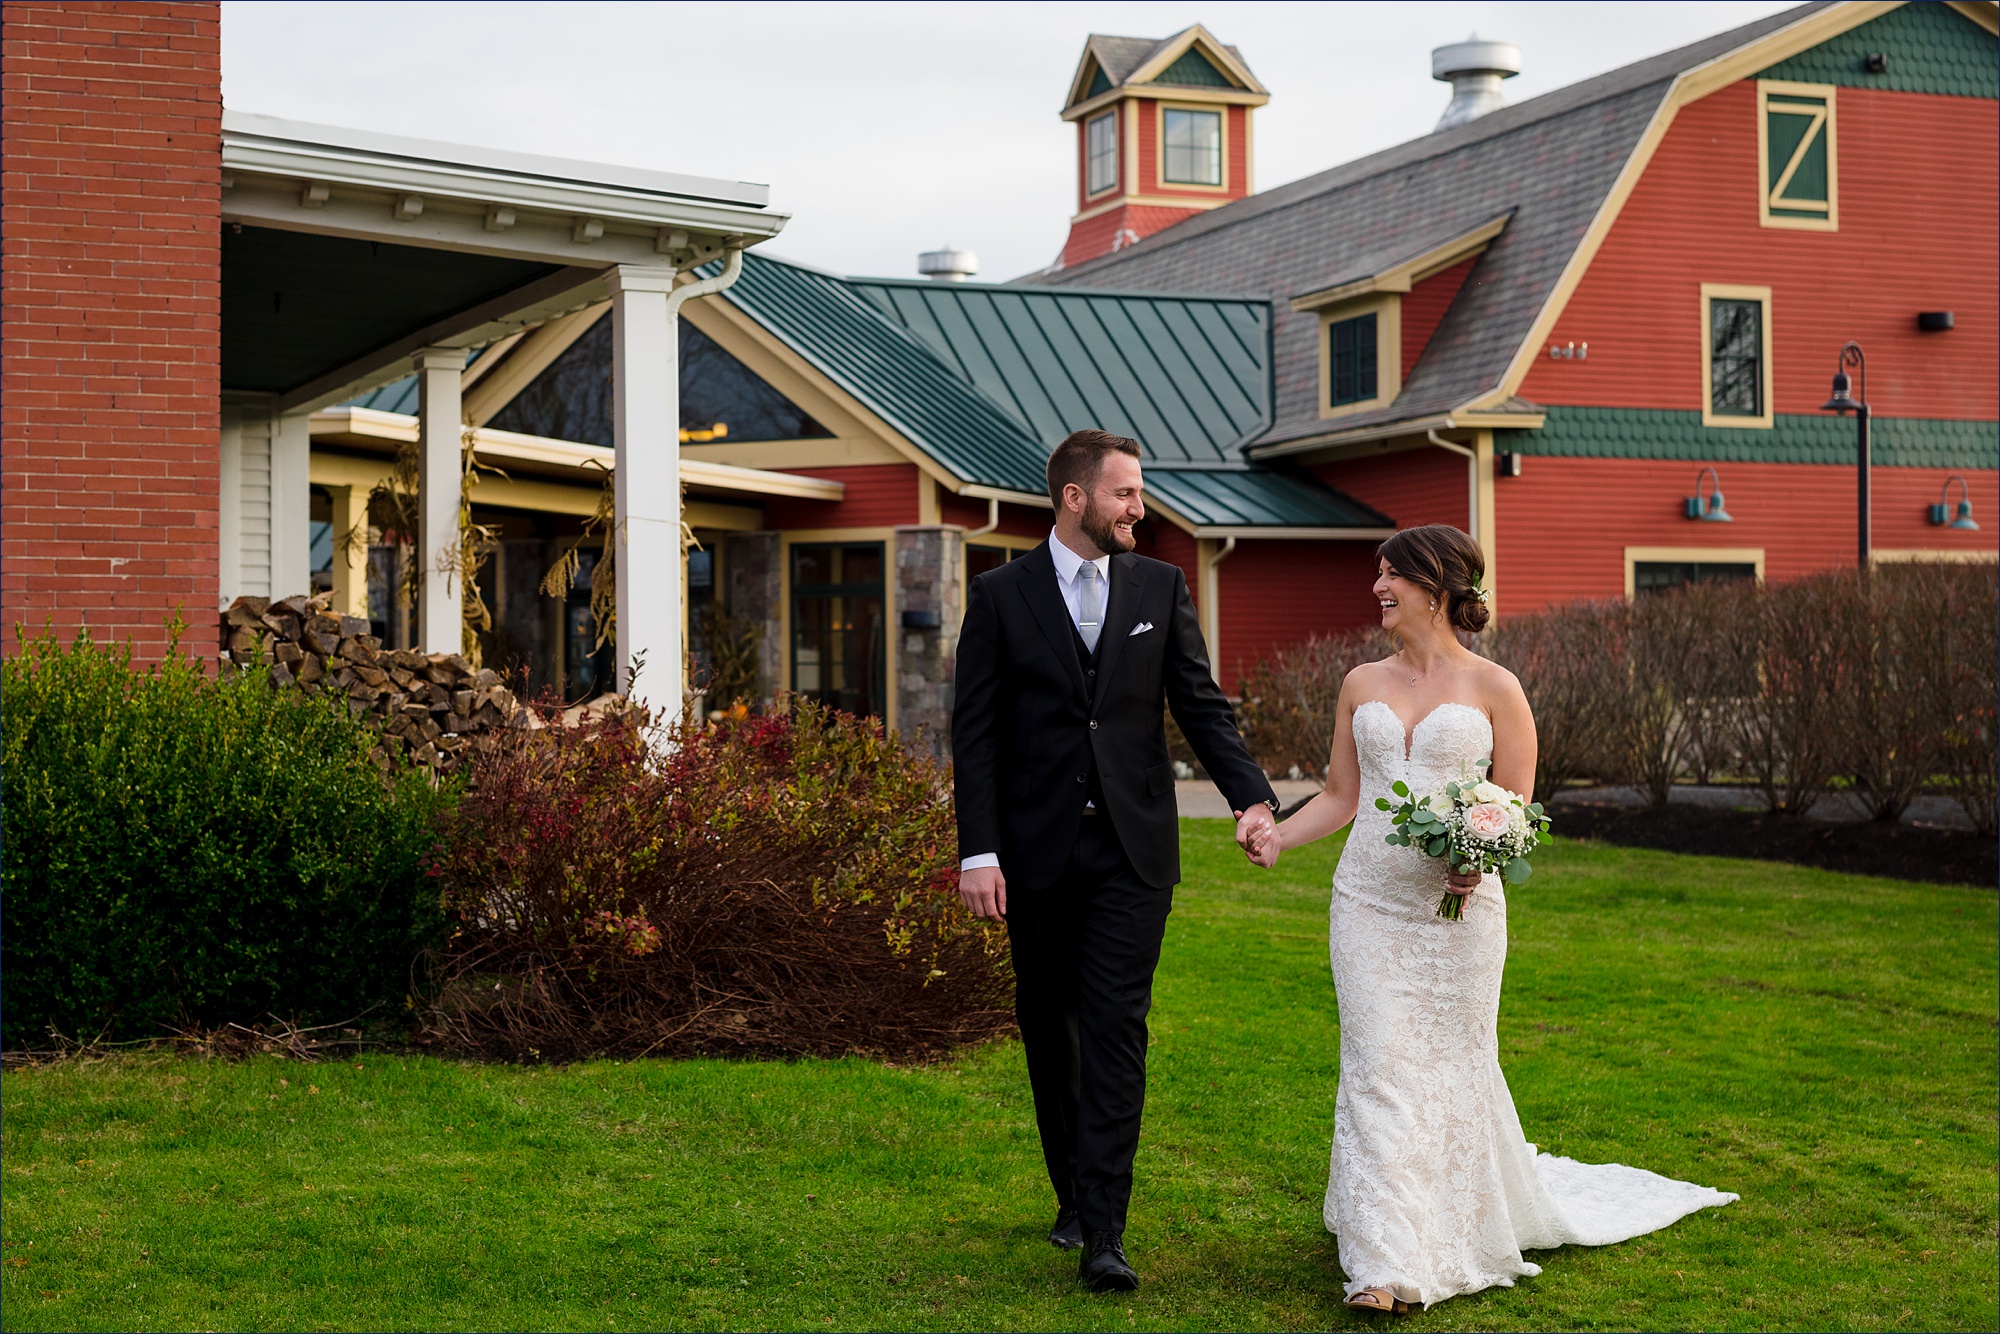 The couple walks together on the grounds of the Red Barn at Outlook Farm in Maine